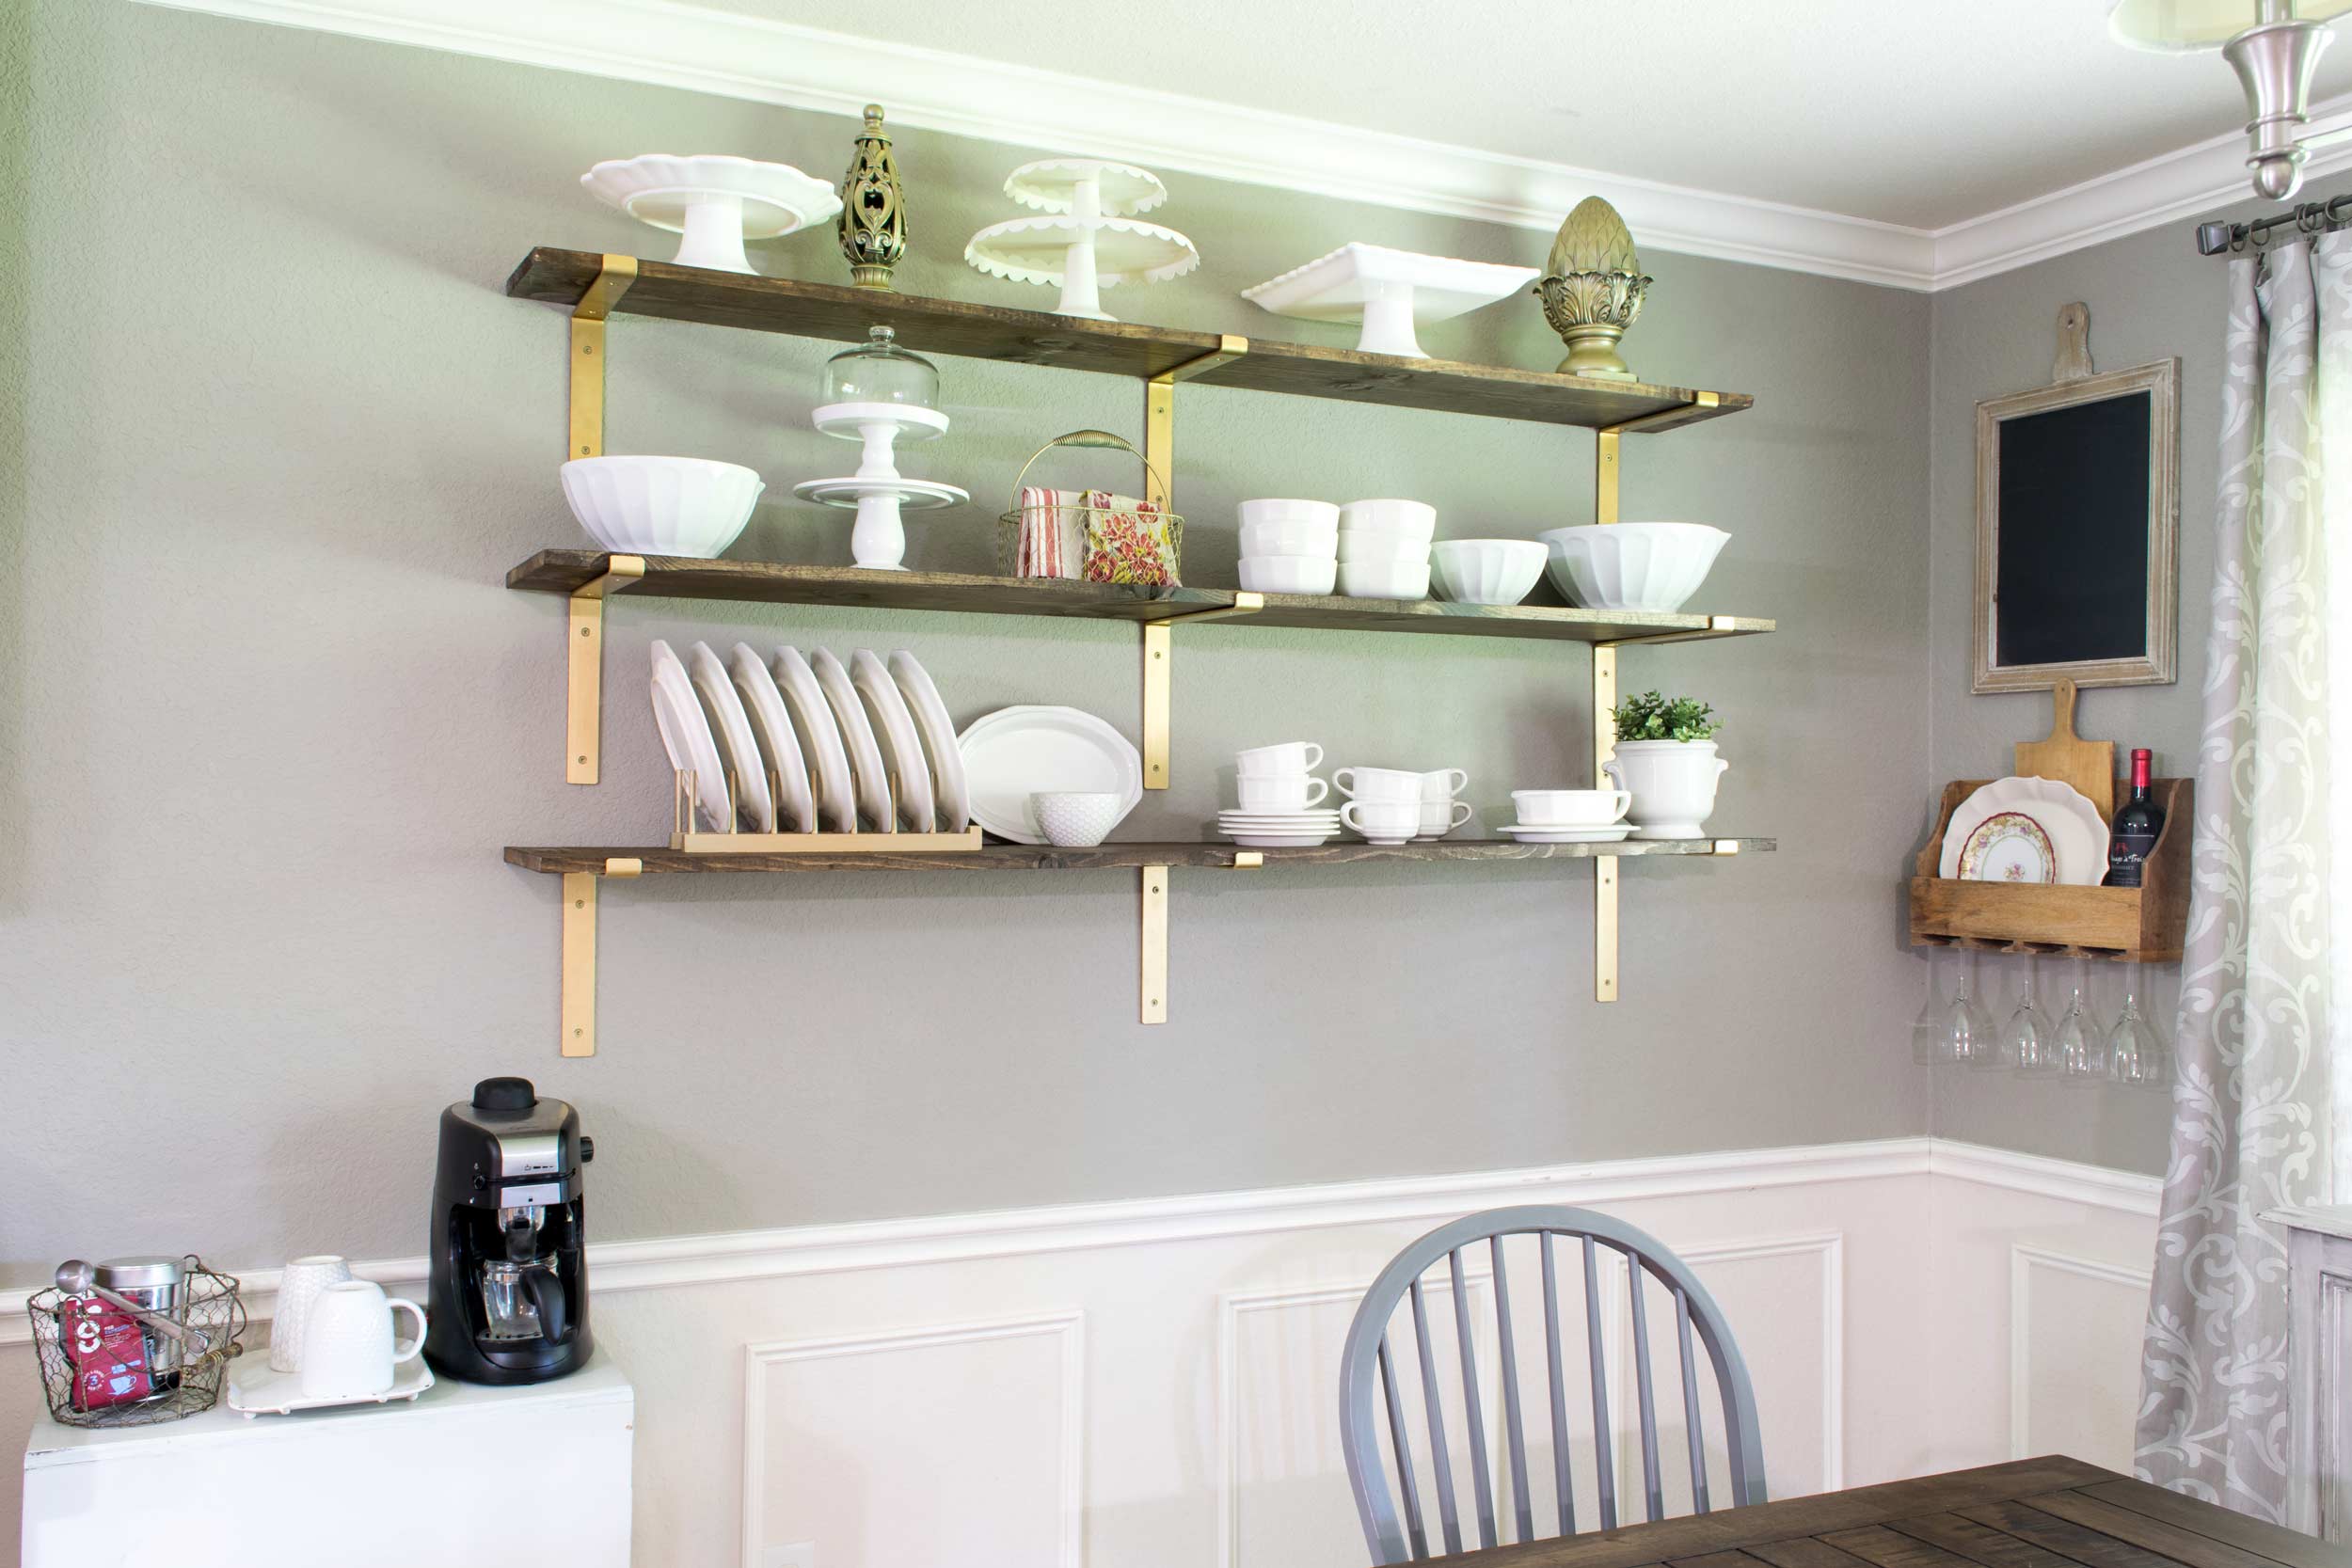 Dining Room With Floating Shelves For Dishes